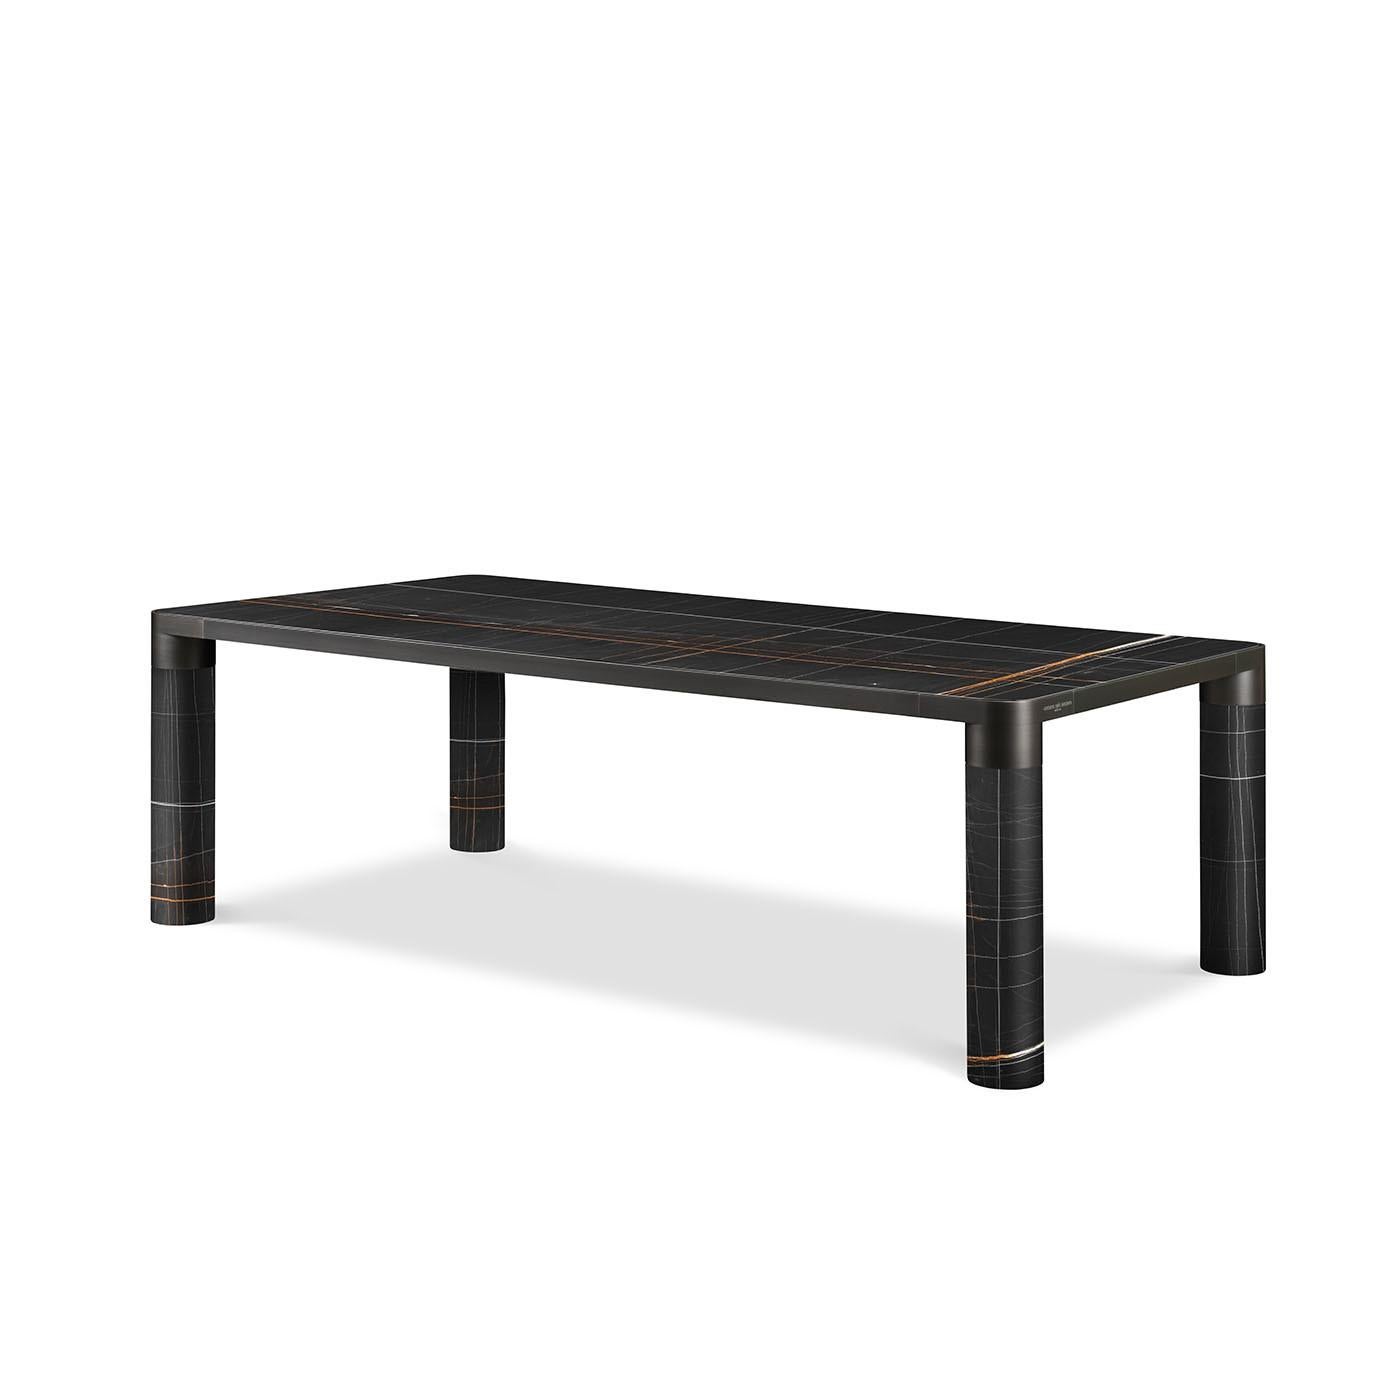 A superb combination of Minimalist design and functional aesthetic, this splendid dining table will have a bold and stately presence in a contemporary dining room. Boasting a Classic rectangular shape resting on four sturdy legs, the piece is